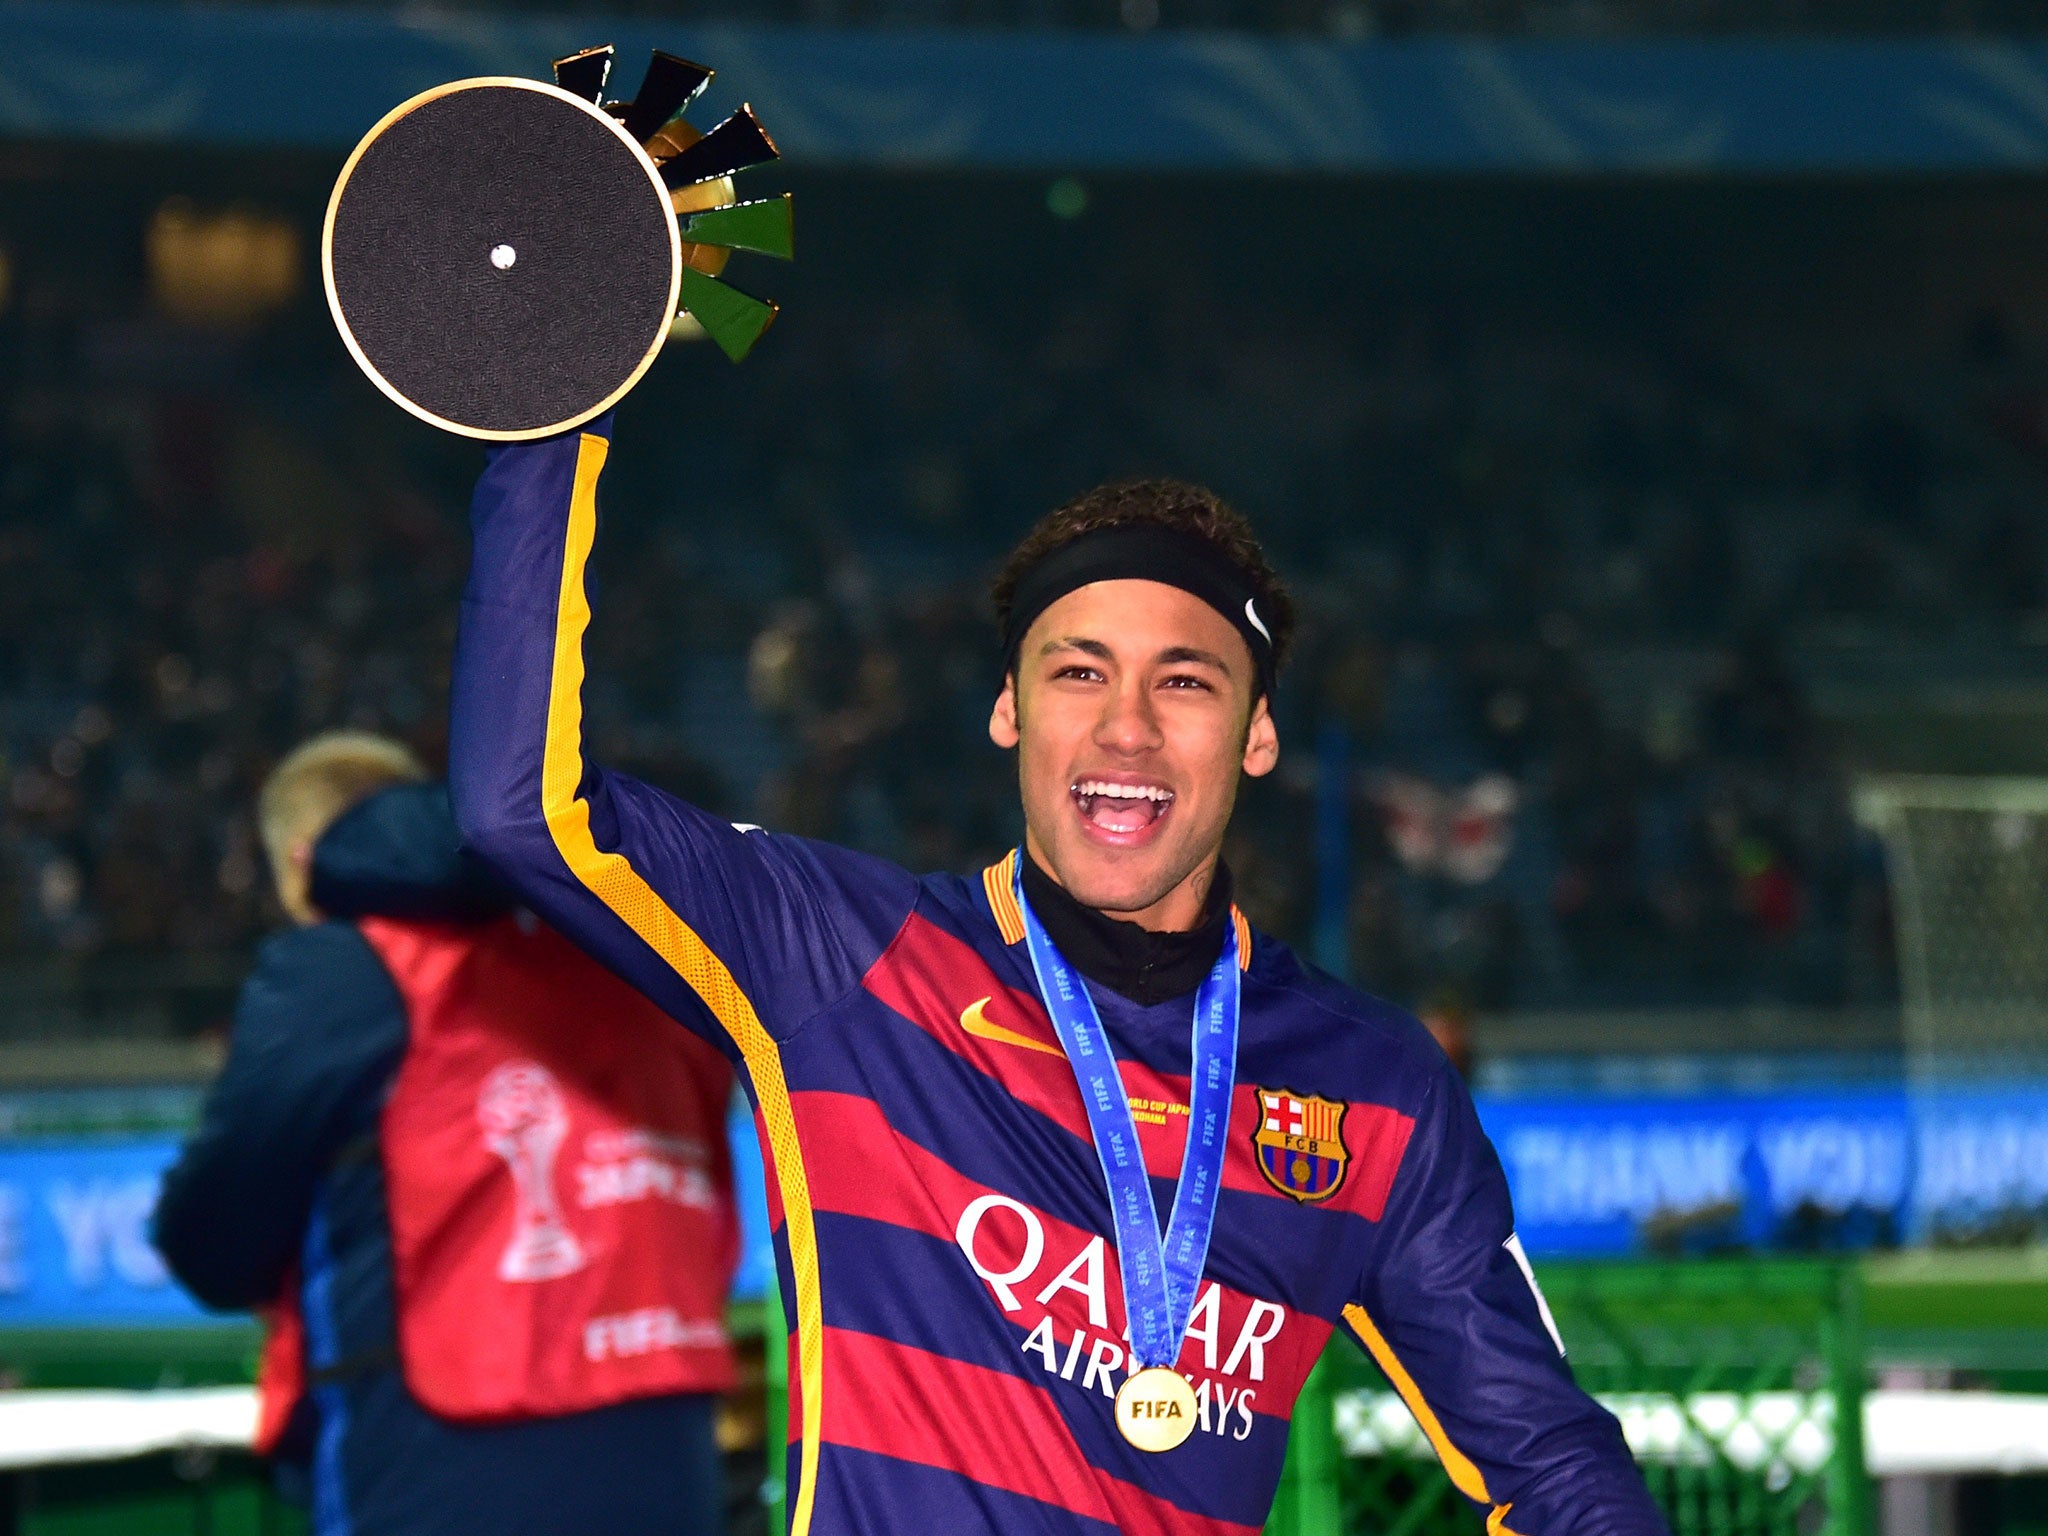 Barcelona forward Neymar has revealed that Manchester City want to sign him